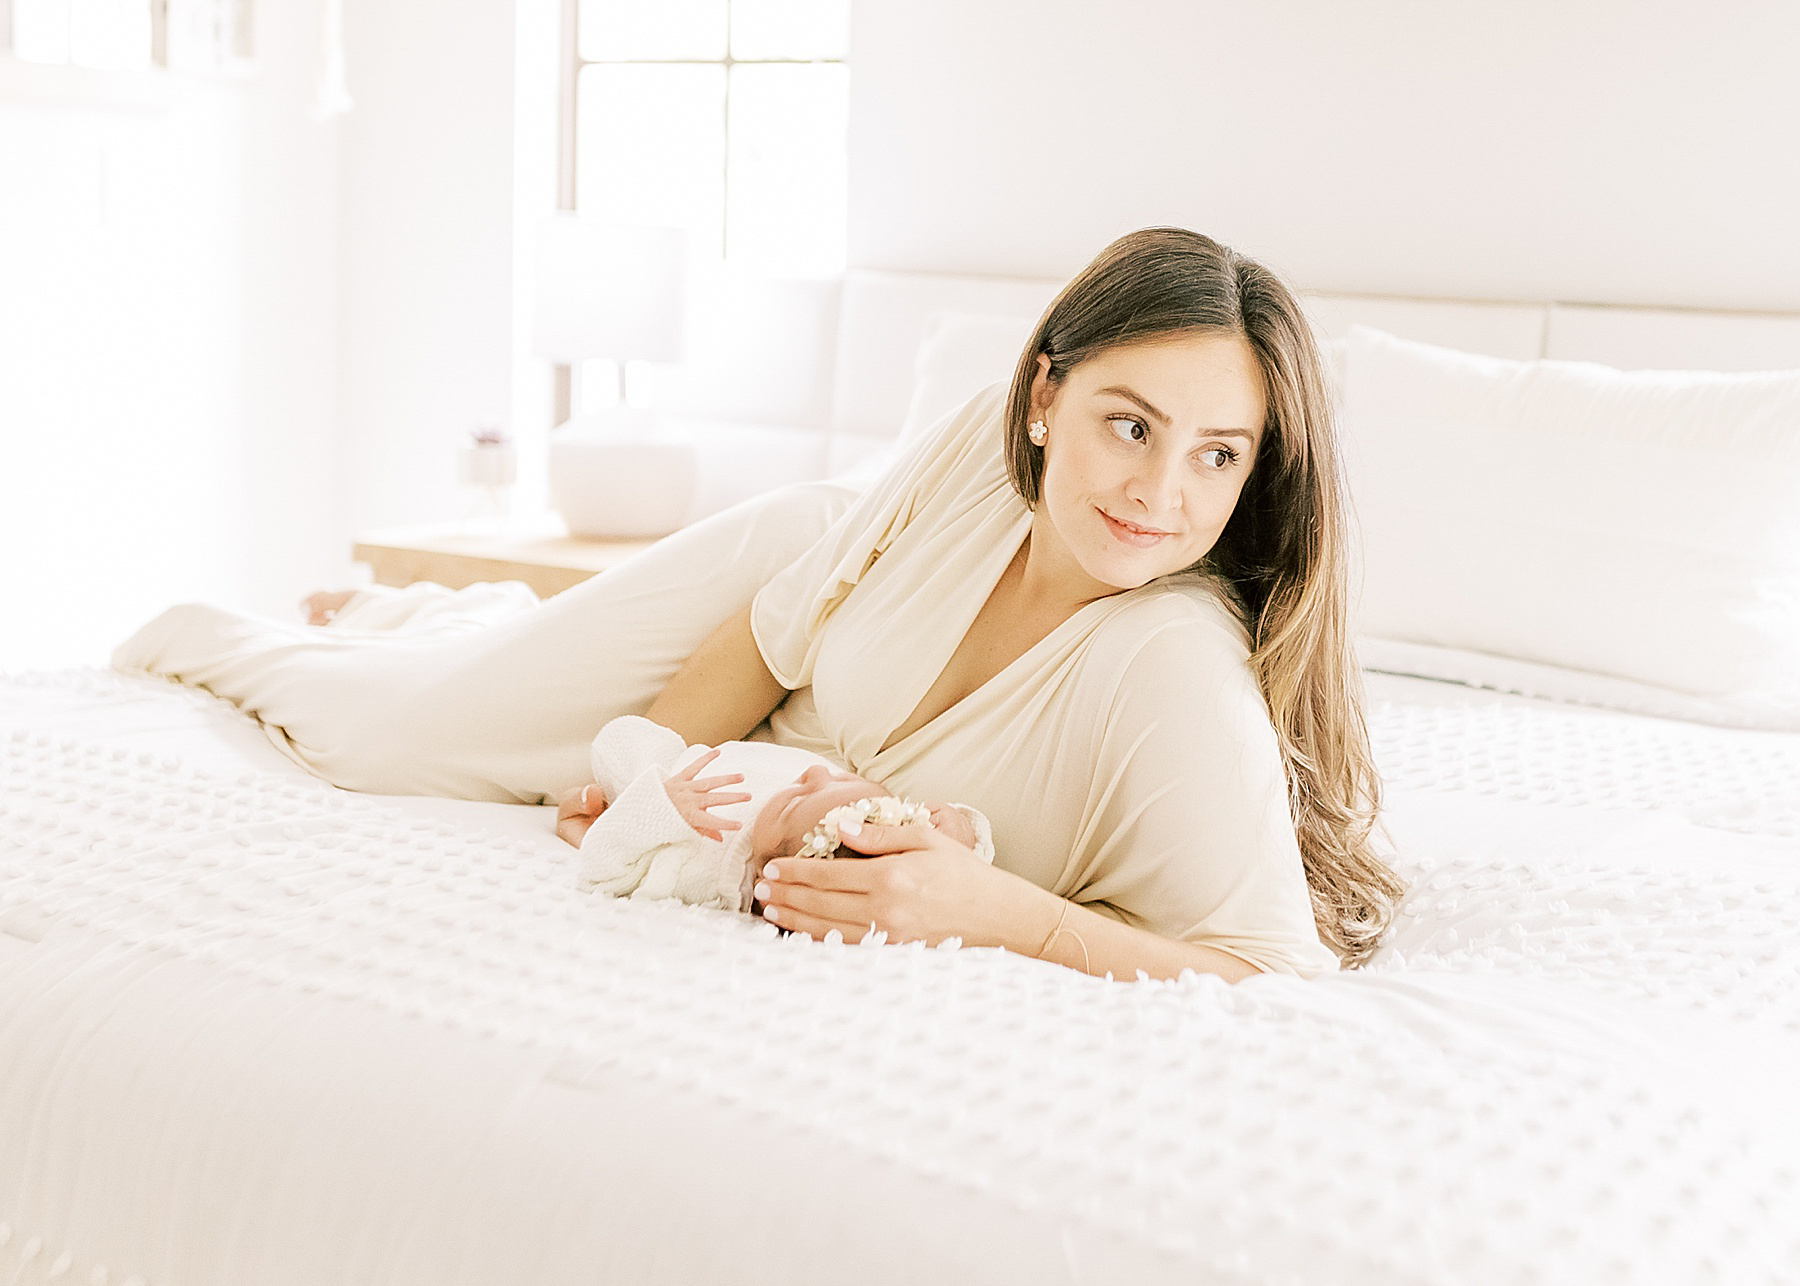 woman with long dark hair in cream long dress sitting on bed smiling with baby